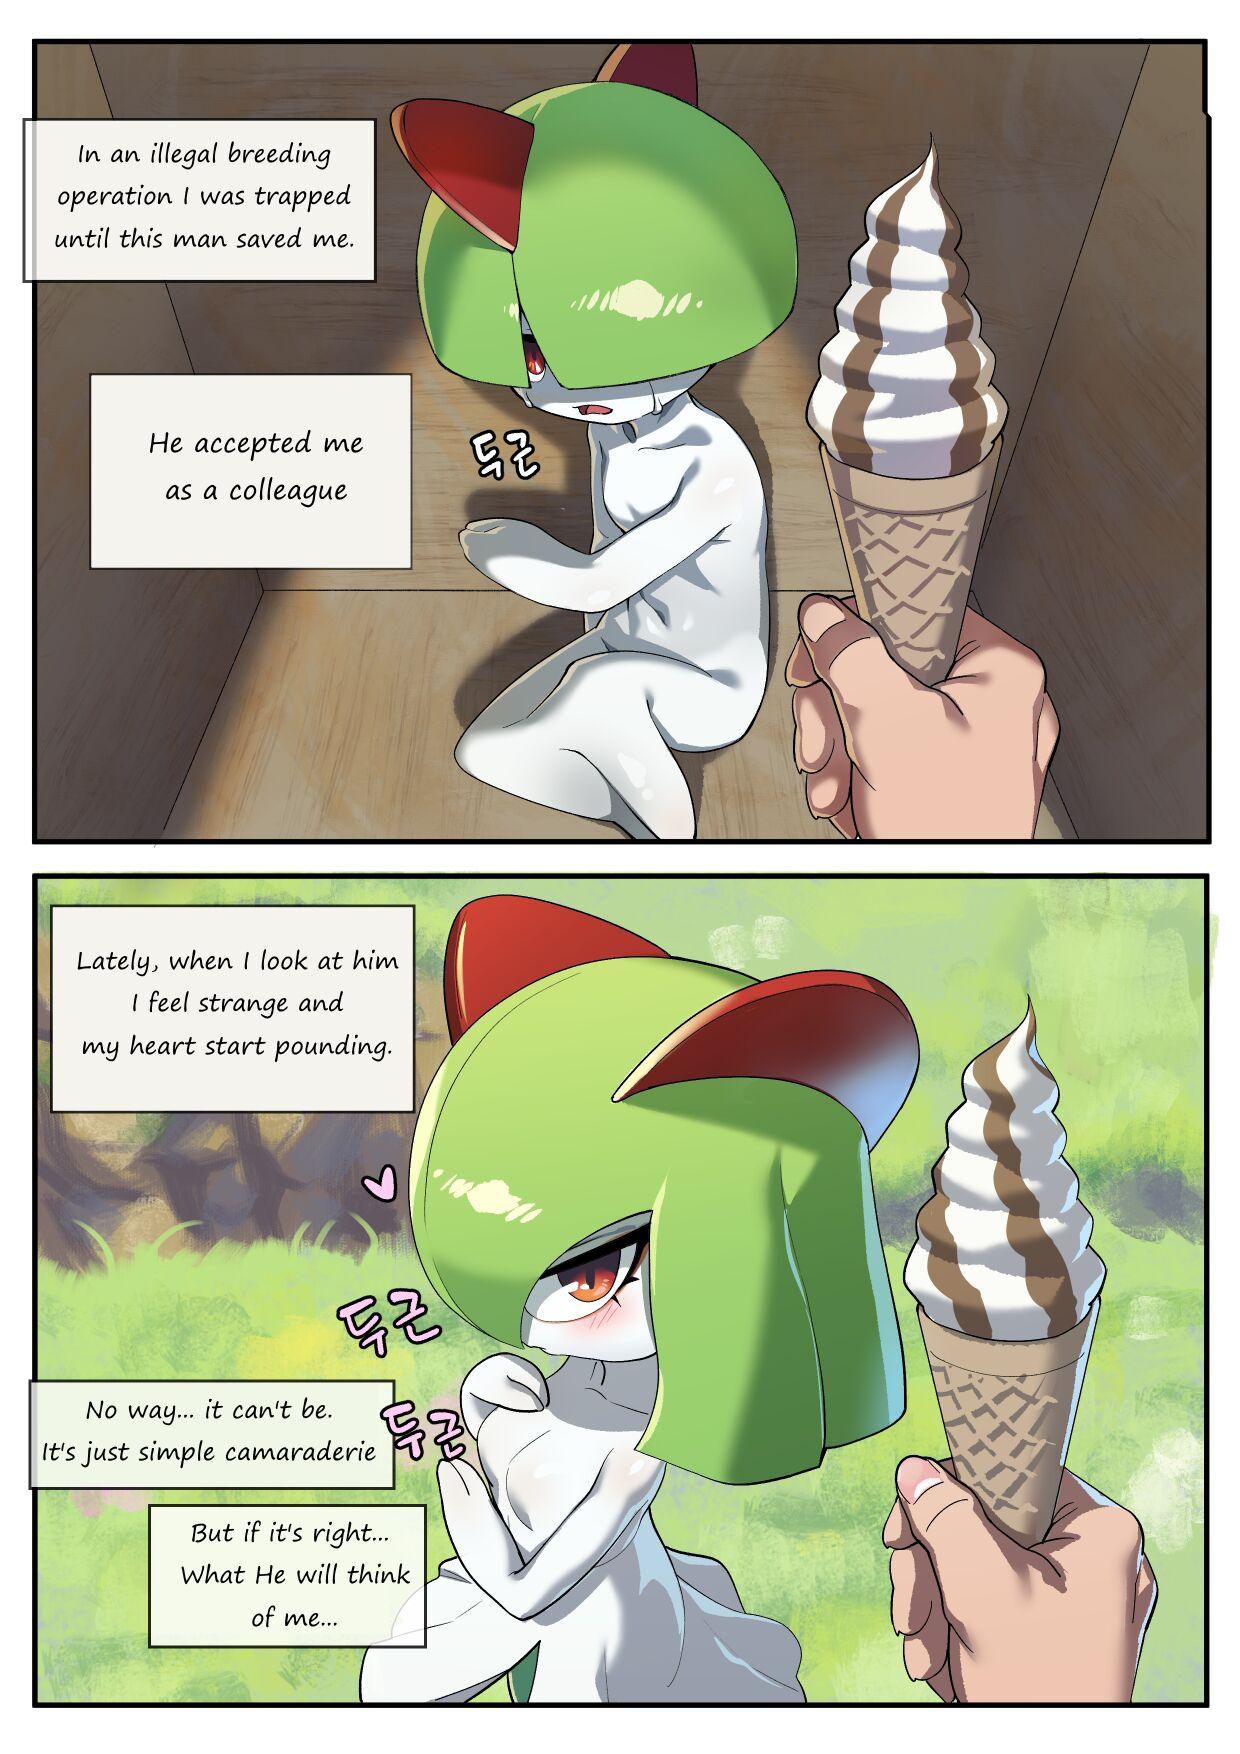 Bedroom The Gardevior that loved her trainer too much - Pokemon | pocket monsters Bed - Page 1